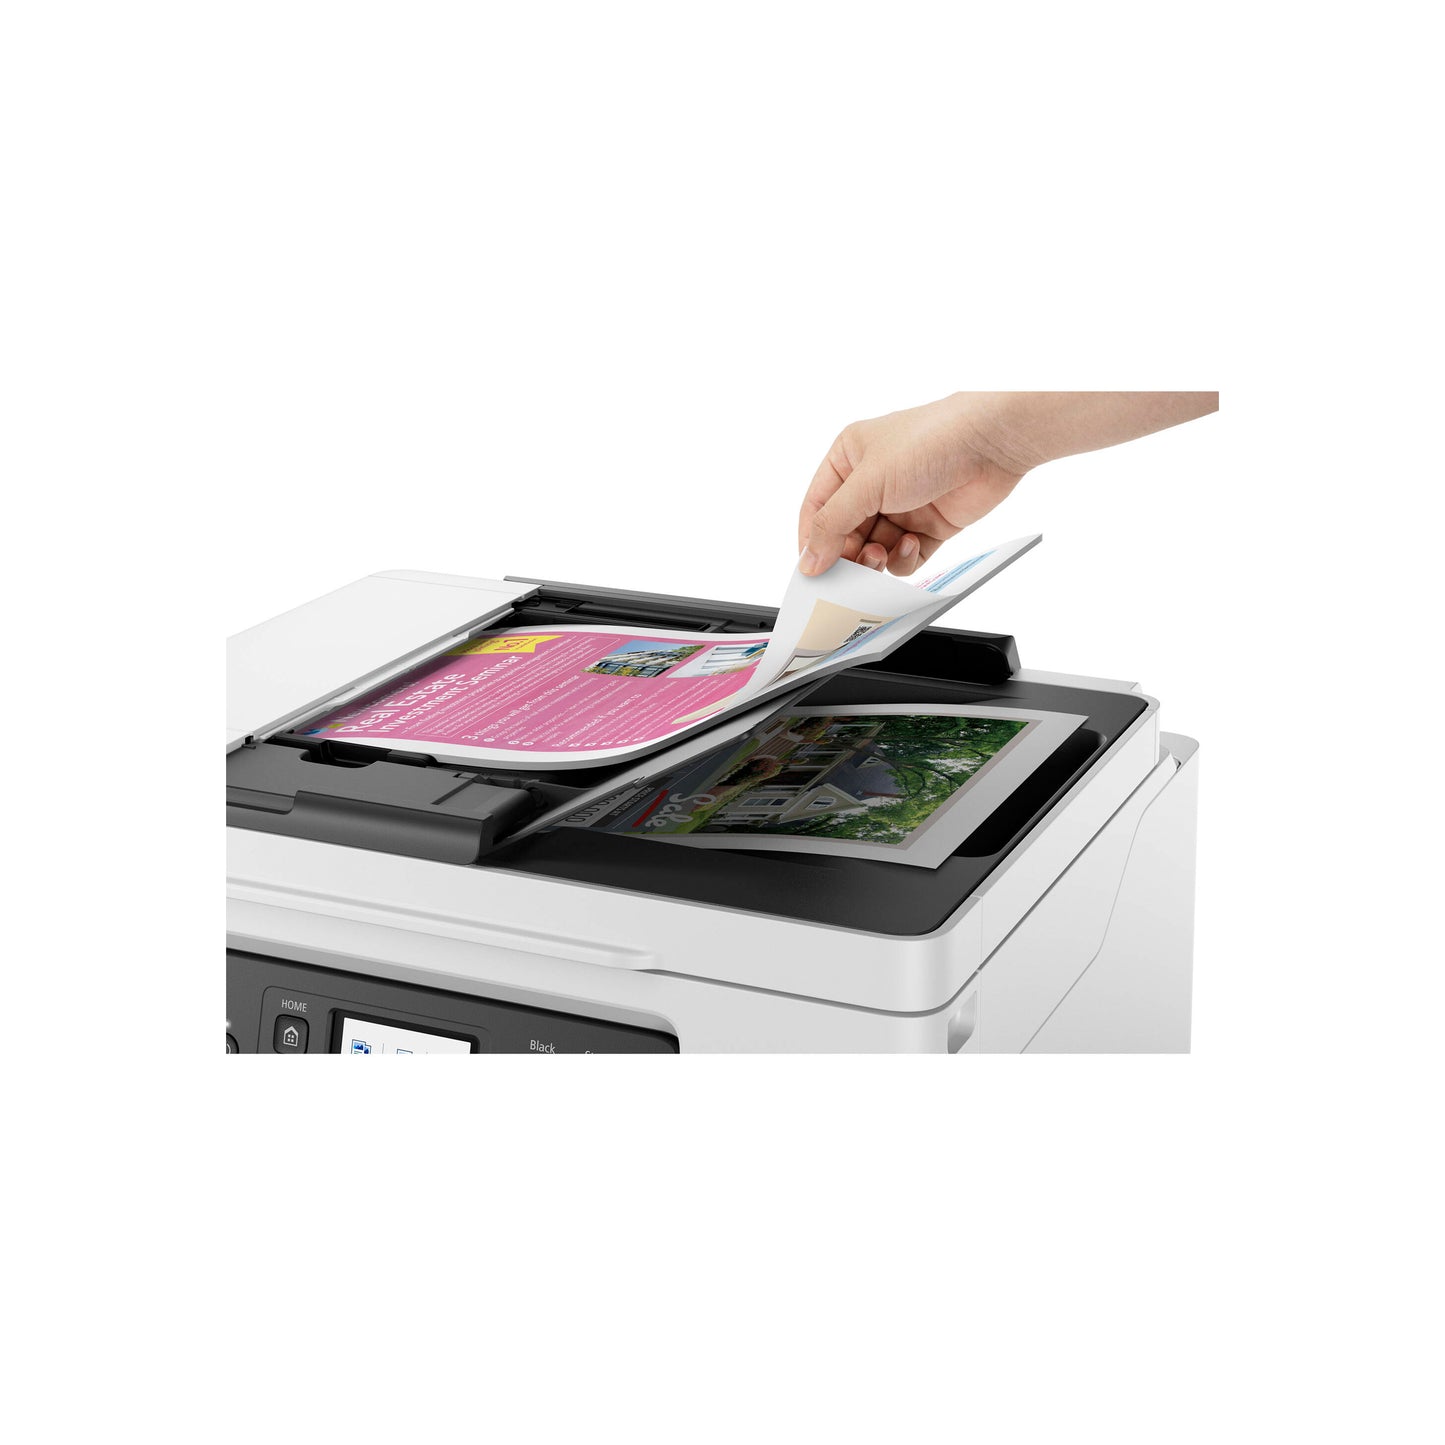 MegaTank MAXIFY GX4020 Wireless Small Office All-in-One Printer